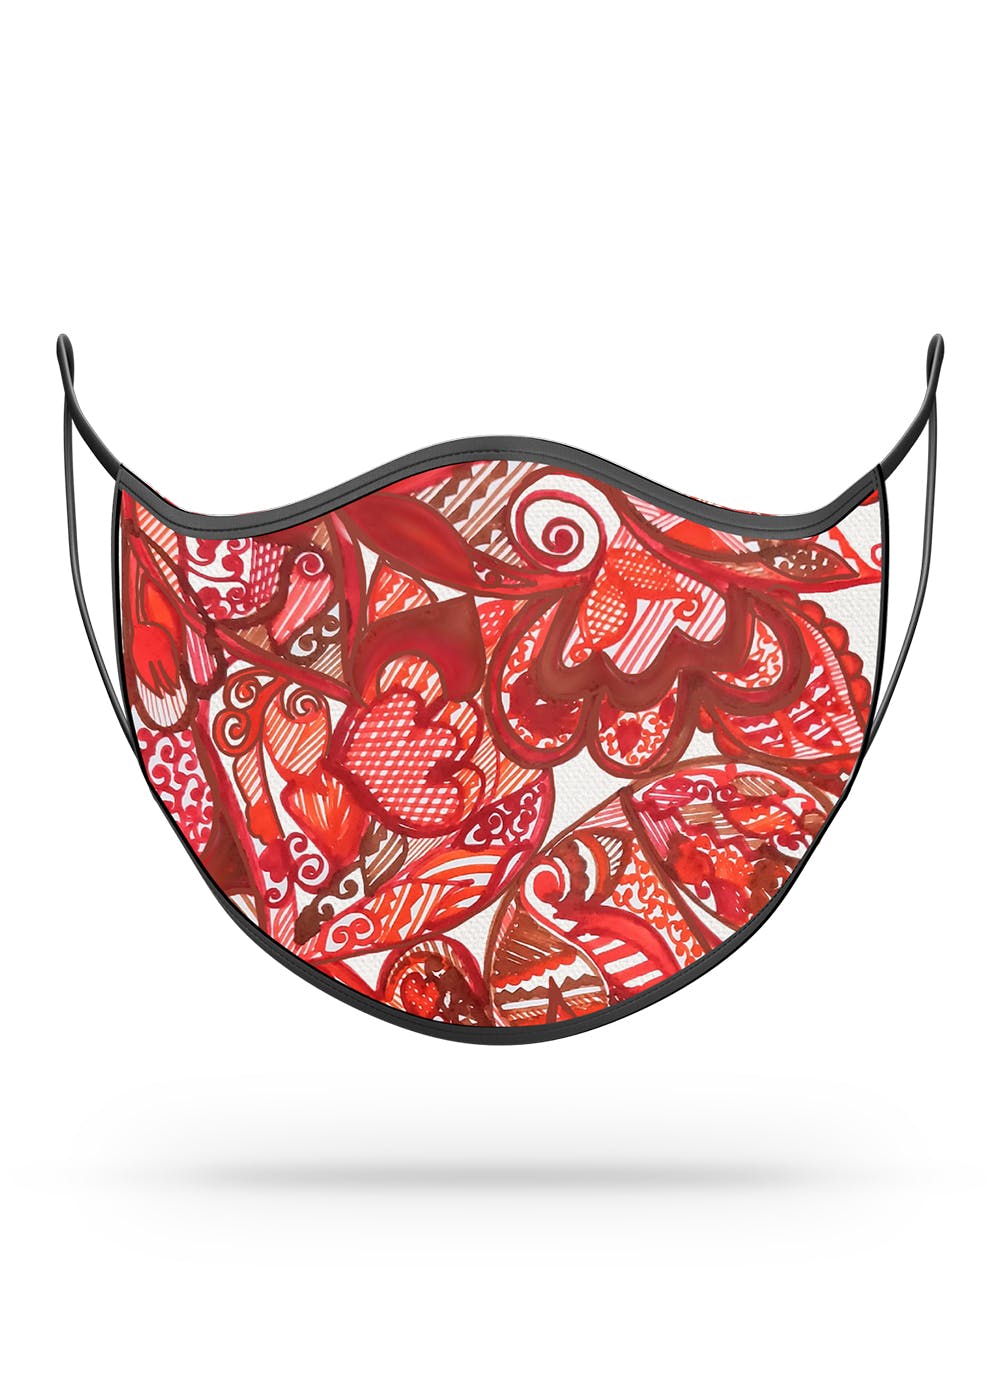 Mood Swings Graphic Sketched Mask